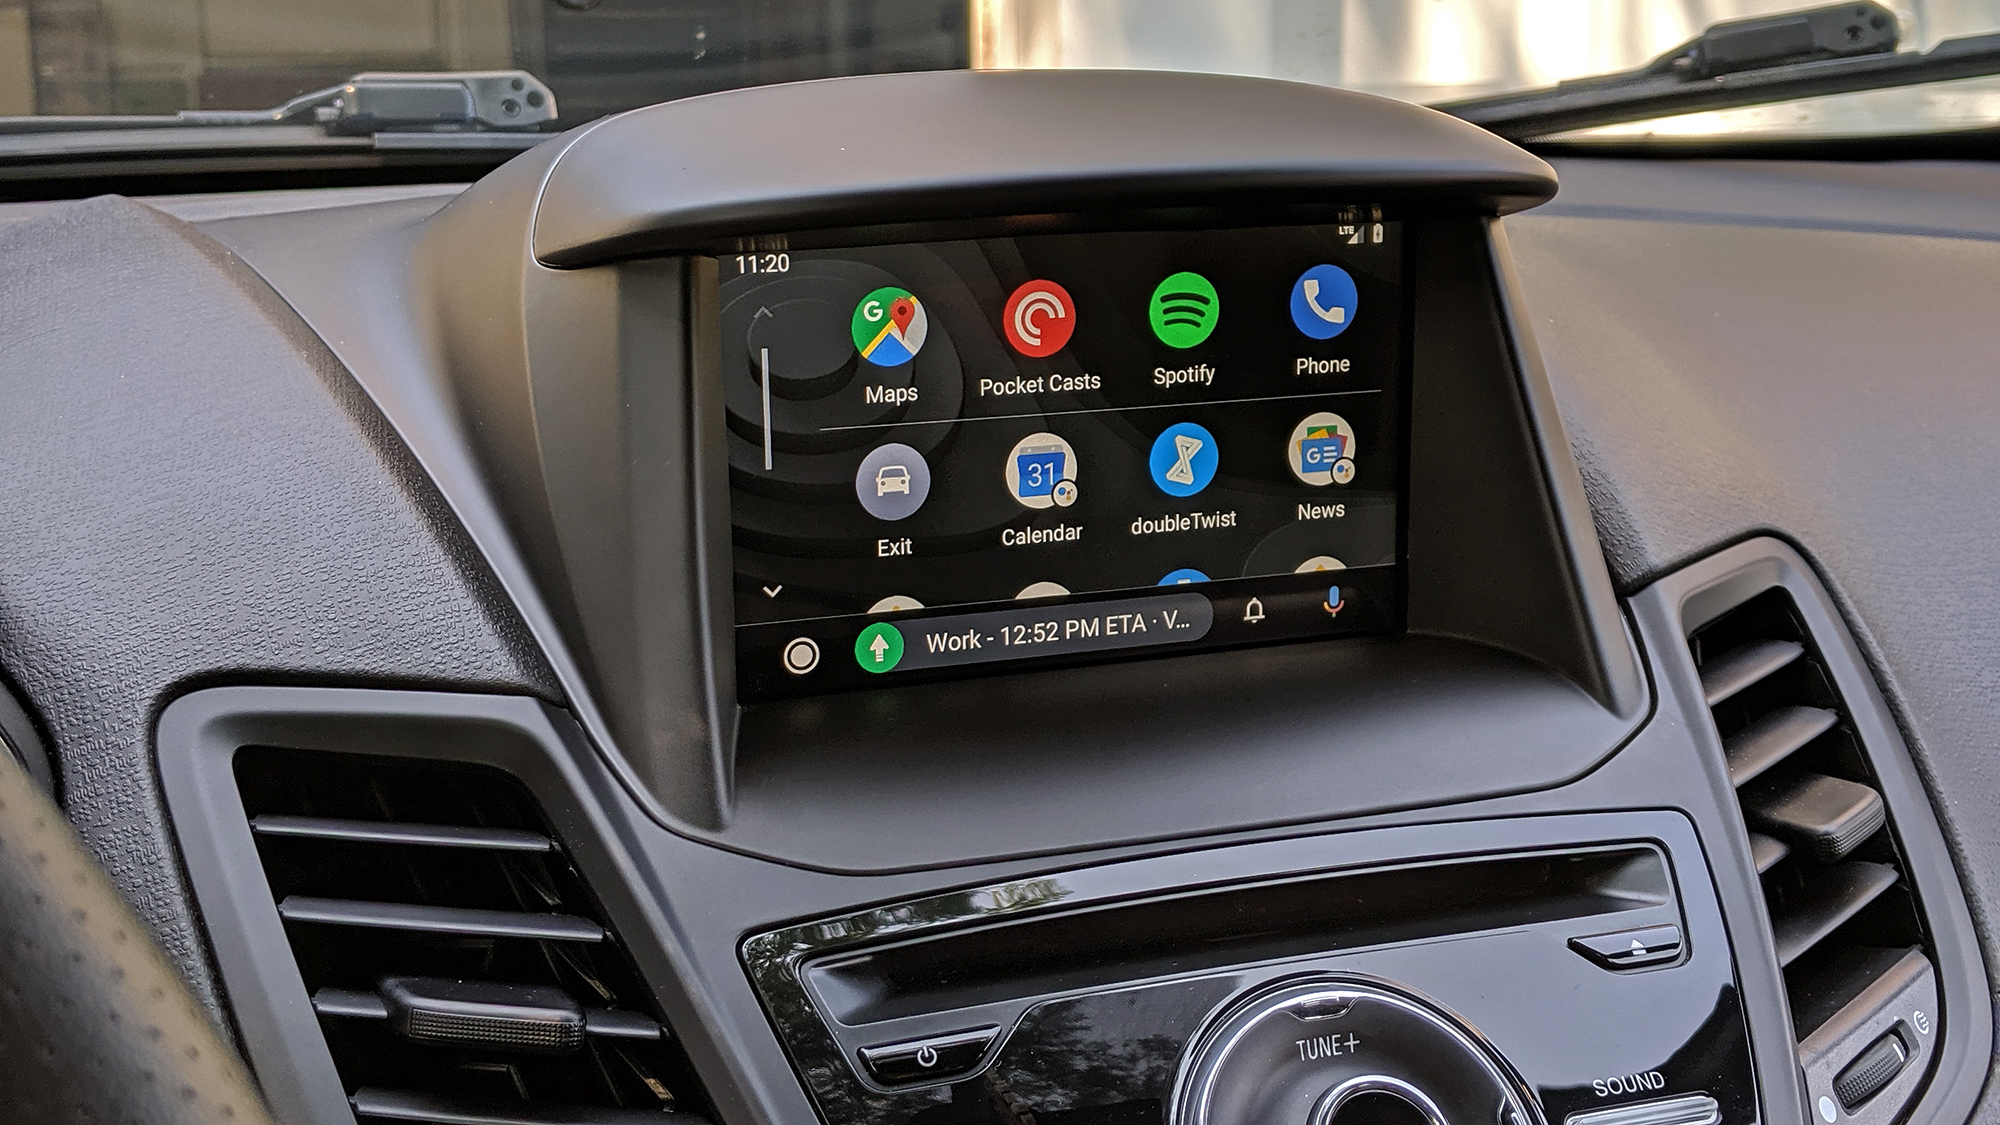 How Well Do You Know Android Auto? Here Are Our Tips and Tricks